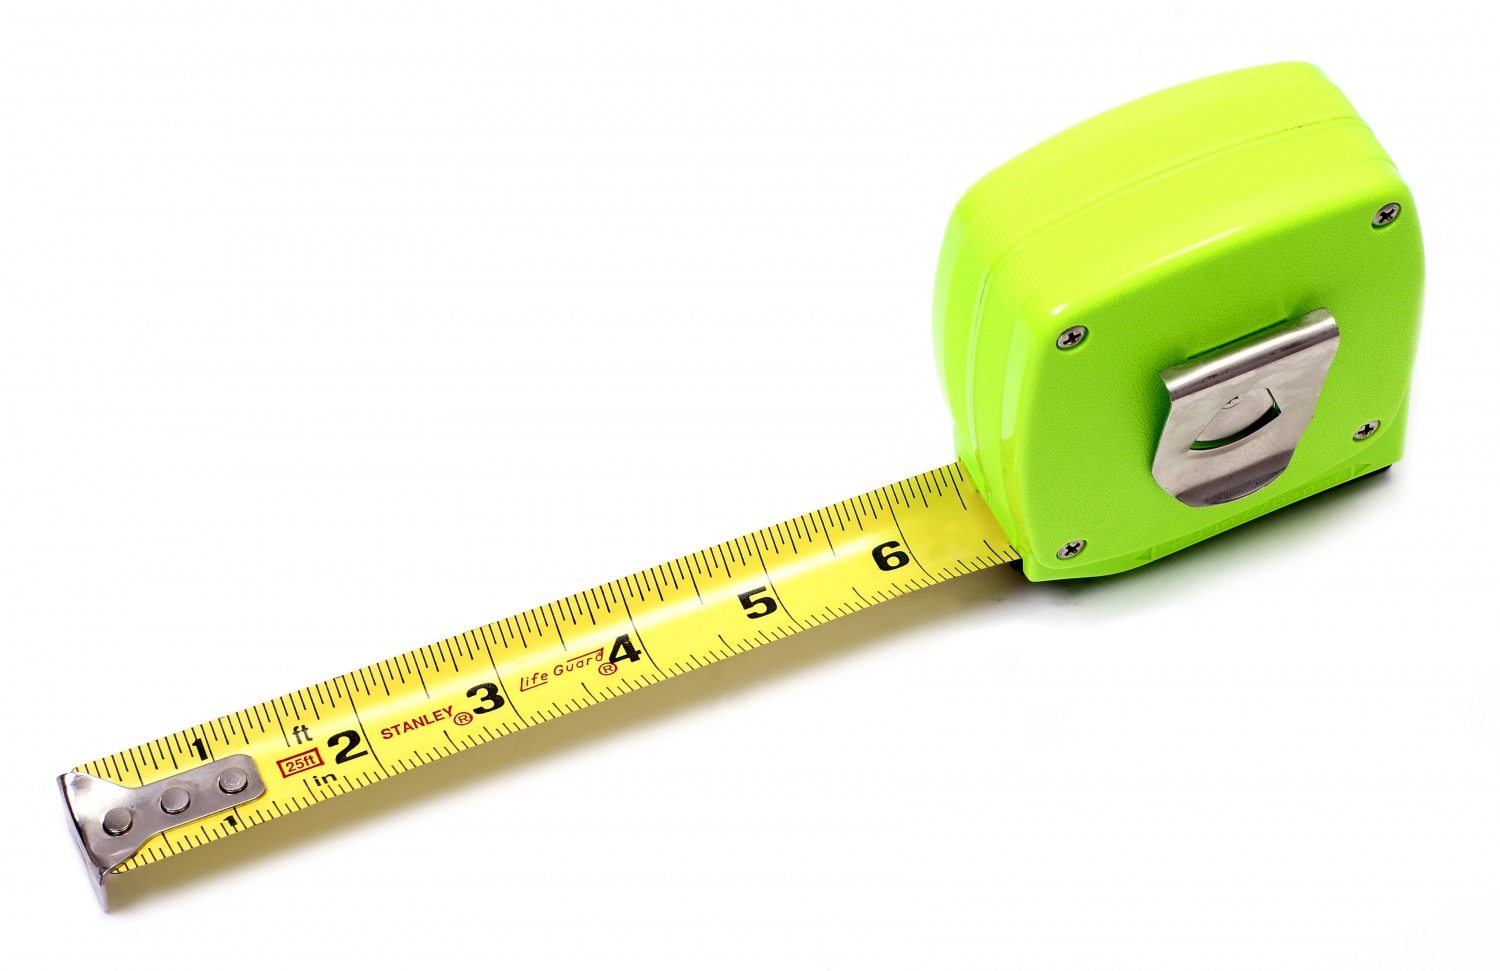 Tape Measure Or Measuring Tape Is A Flexible Ruler  It Consists Of A    